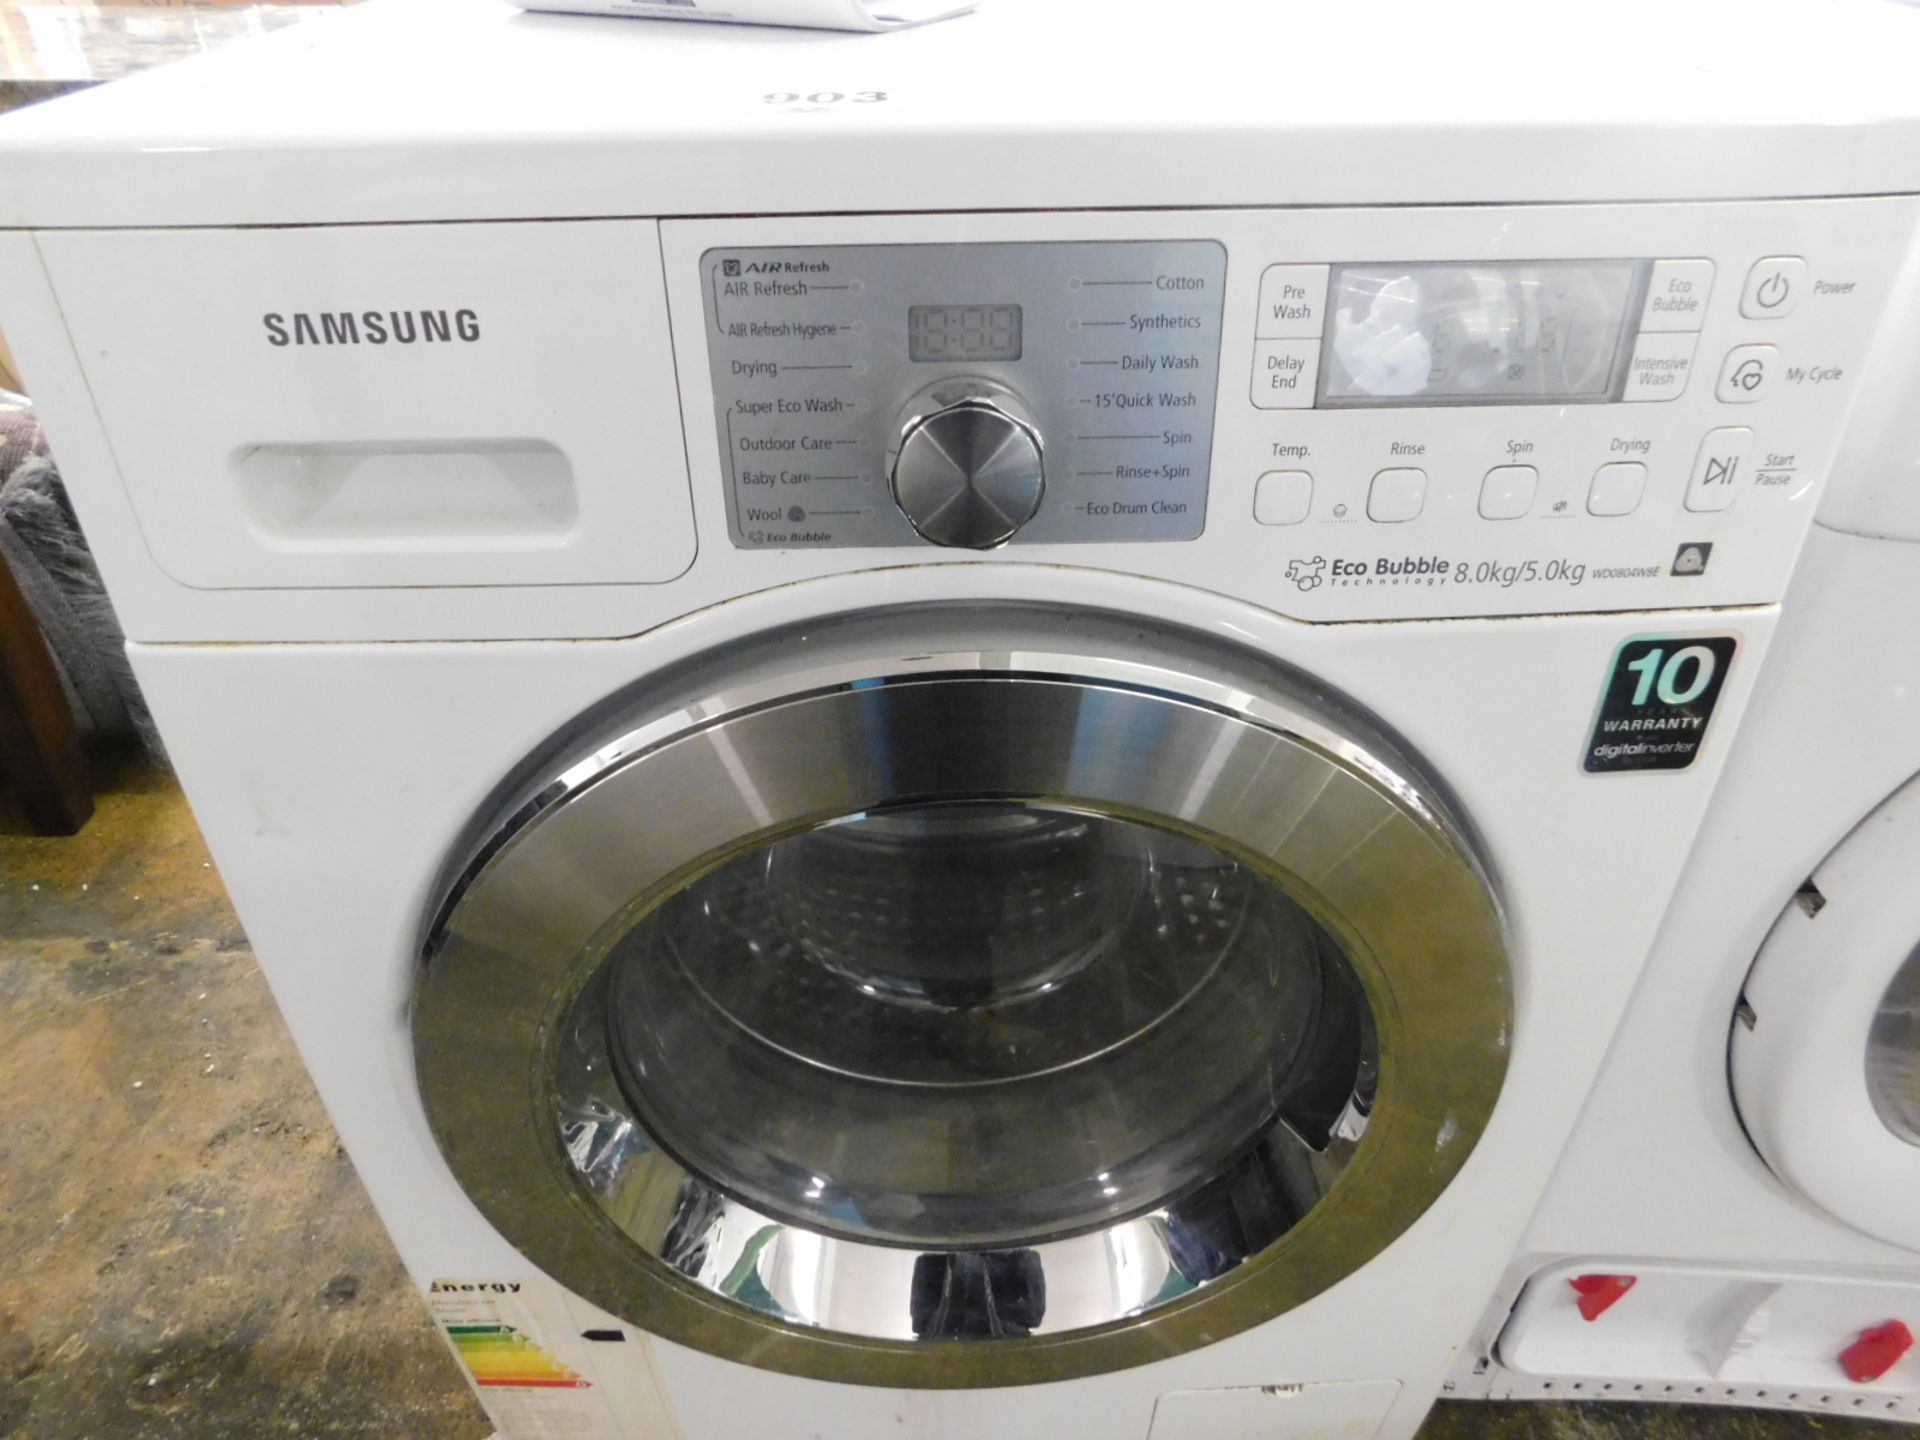 1 SAMSUNG WHITE ECO BUBBLE WD0804WBE 8KG/5KG WASHER DRYER RRP £599